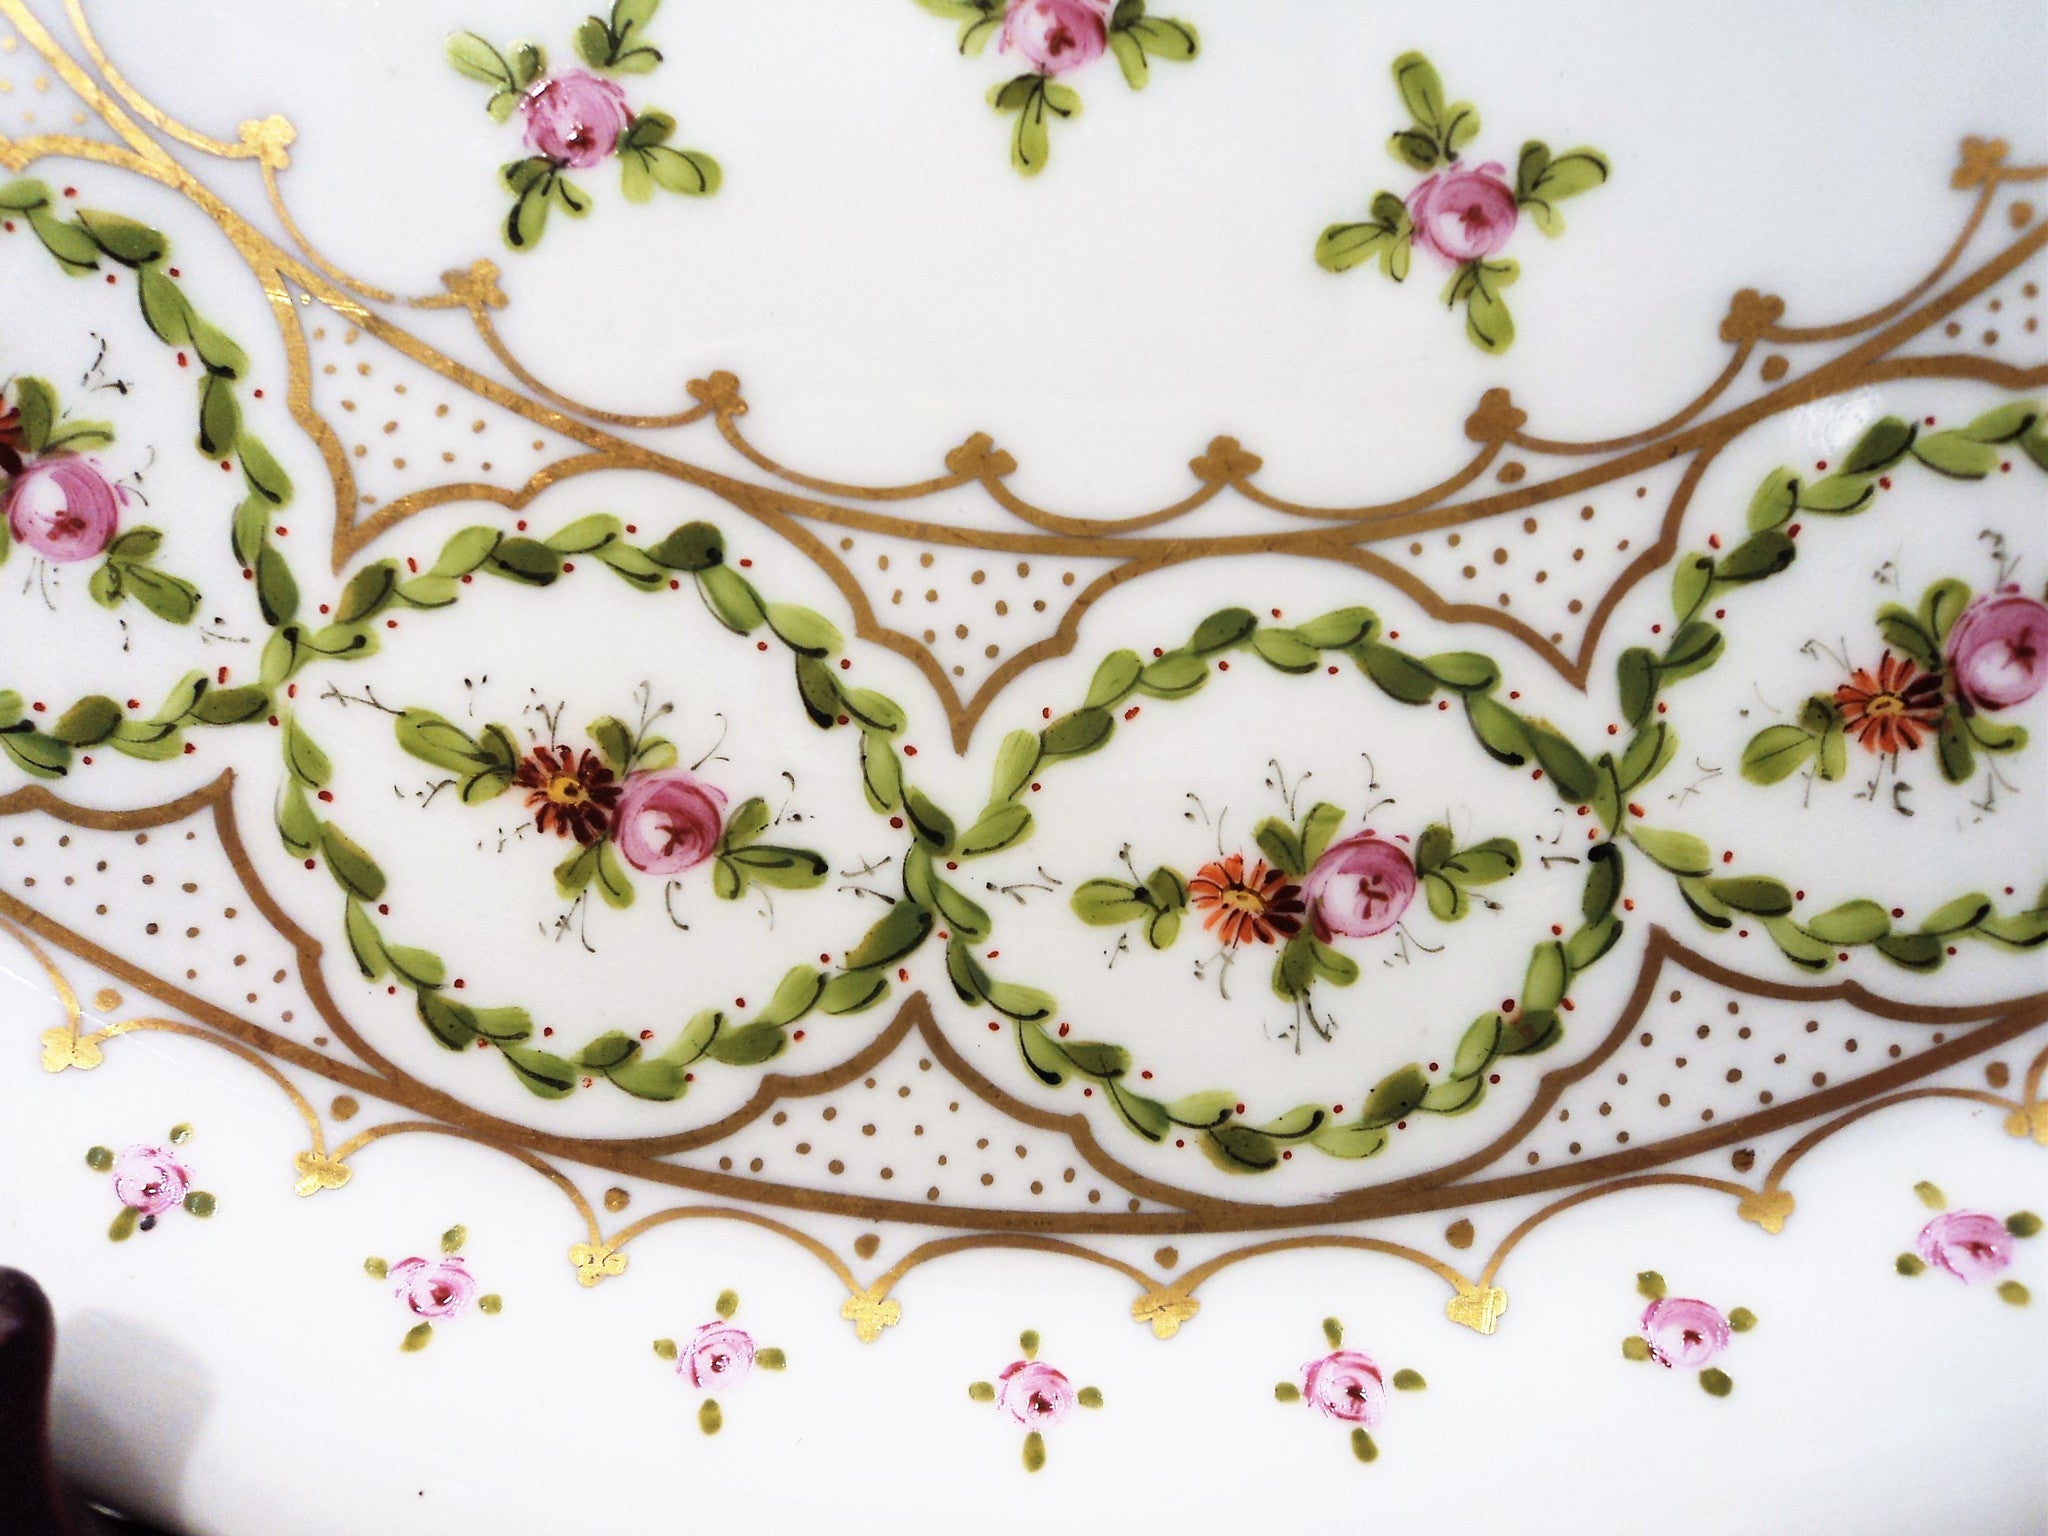 French Hand-painted Round Platter